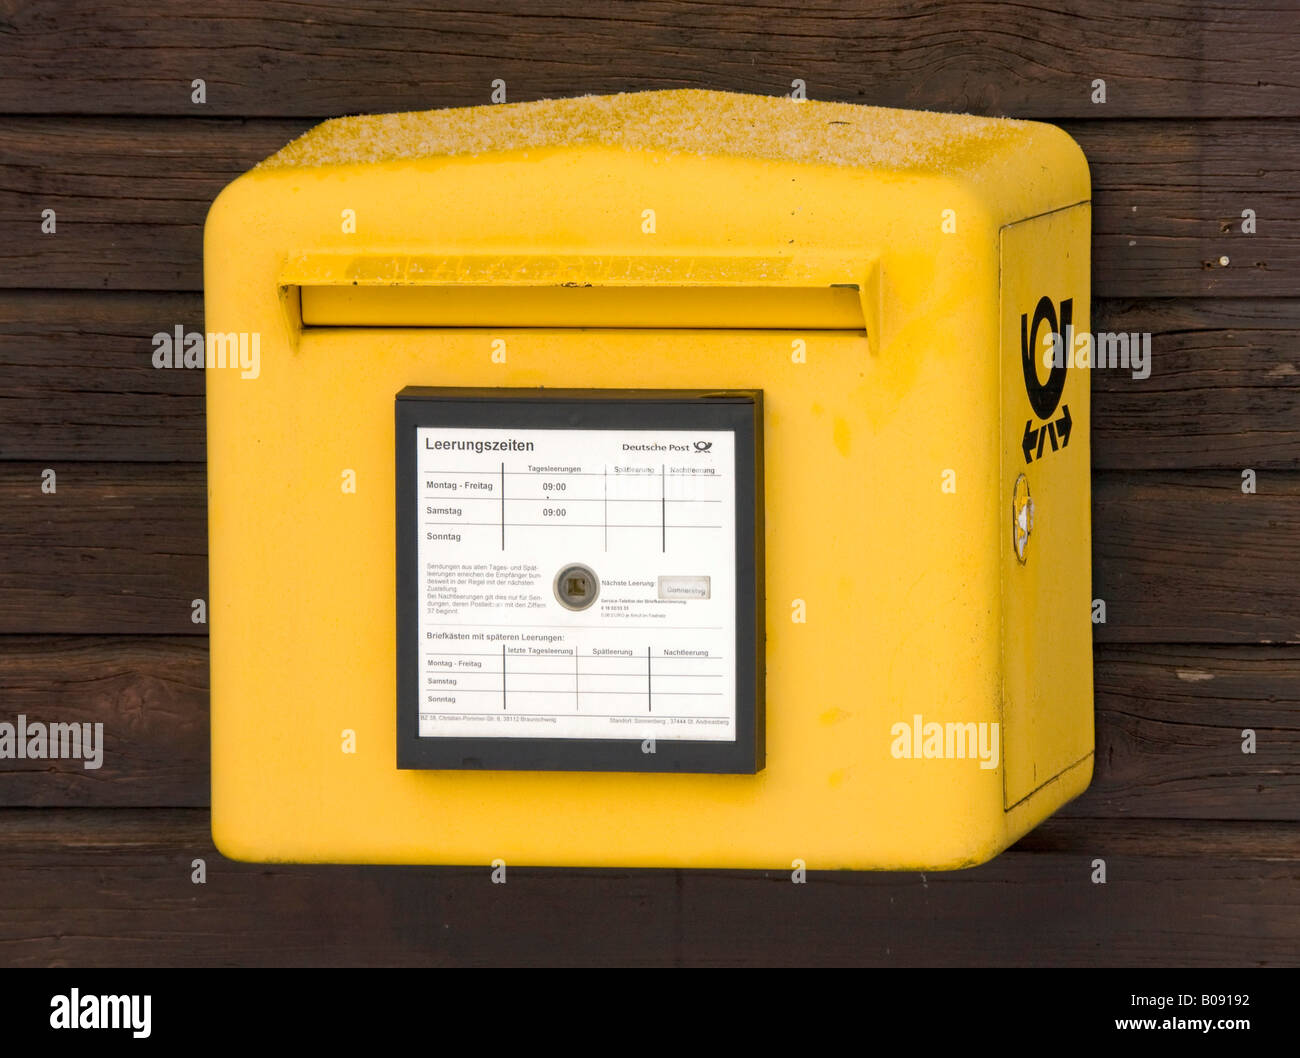 Deutsche Post, German Post letterbox, mailbox mounted on a wooden wall, Germany Stock Photo